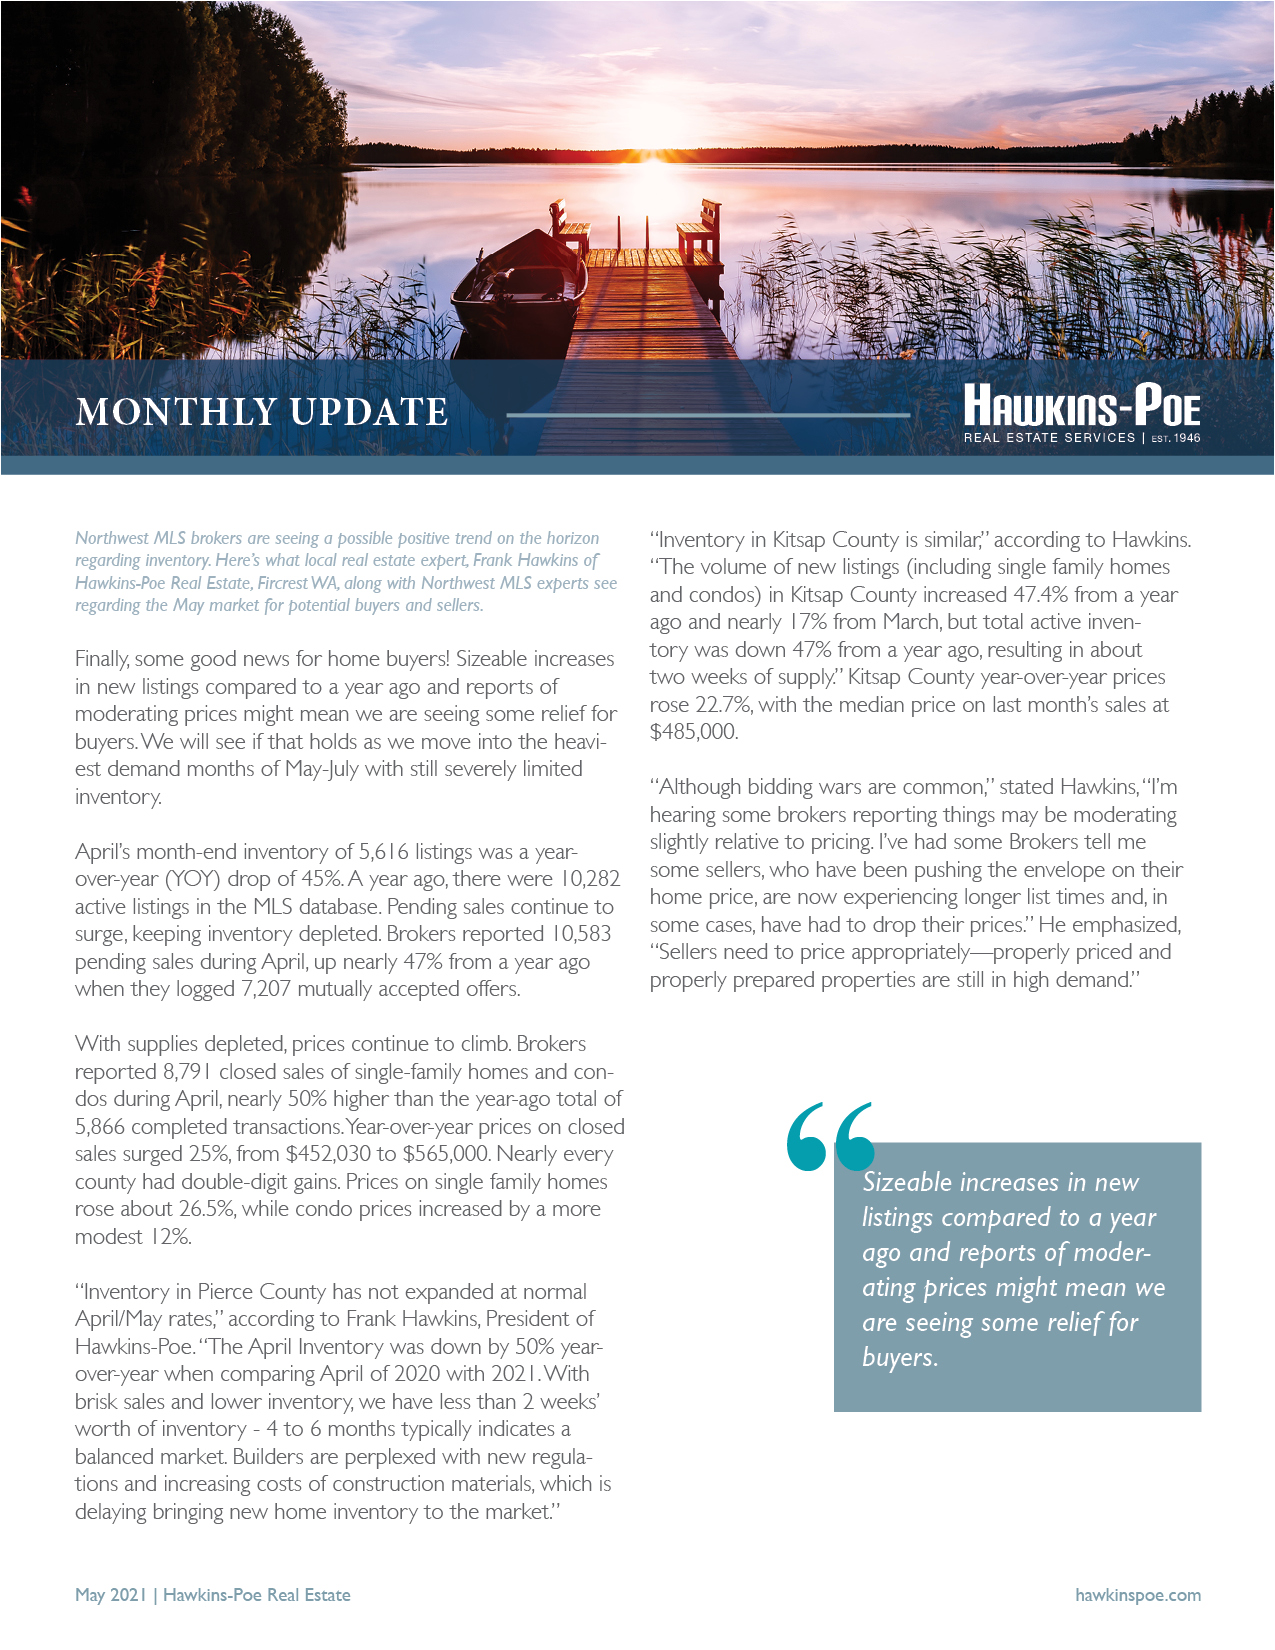 May 2021 Newsletter Hawkins-Poe Real Estate Services